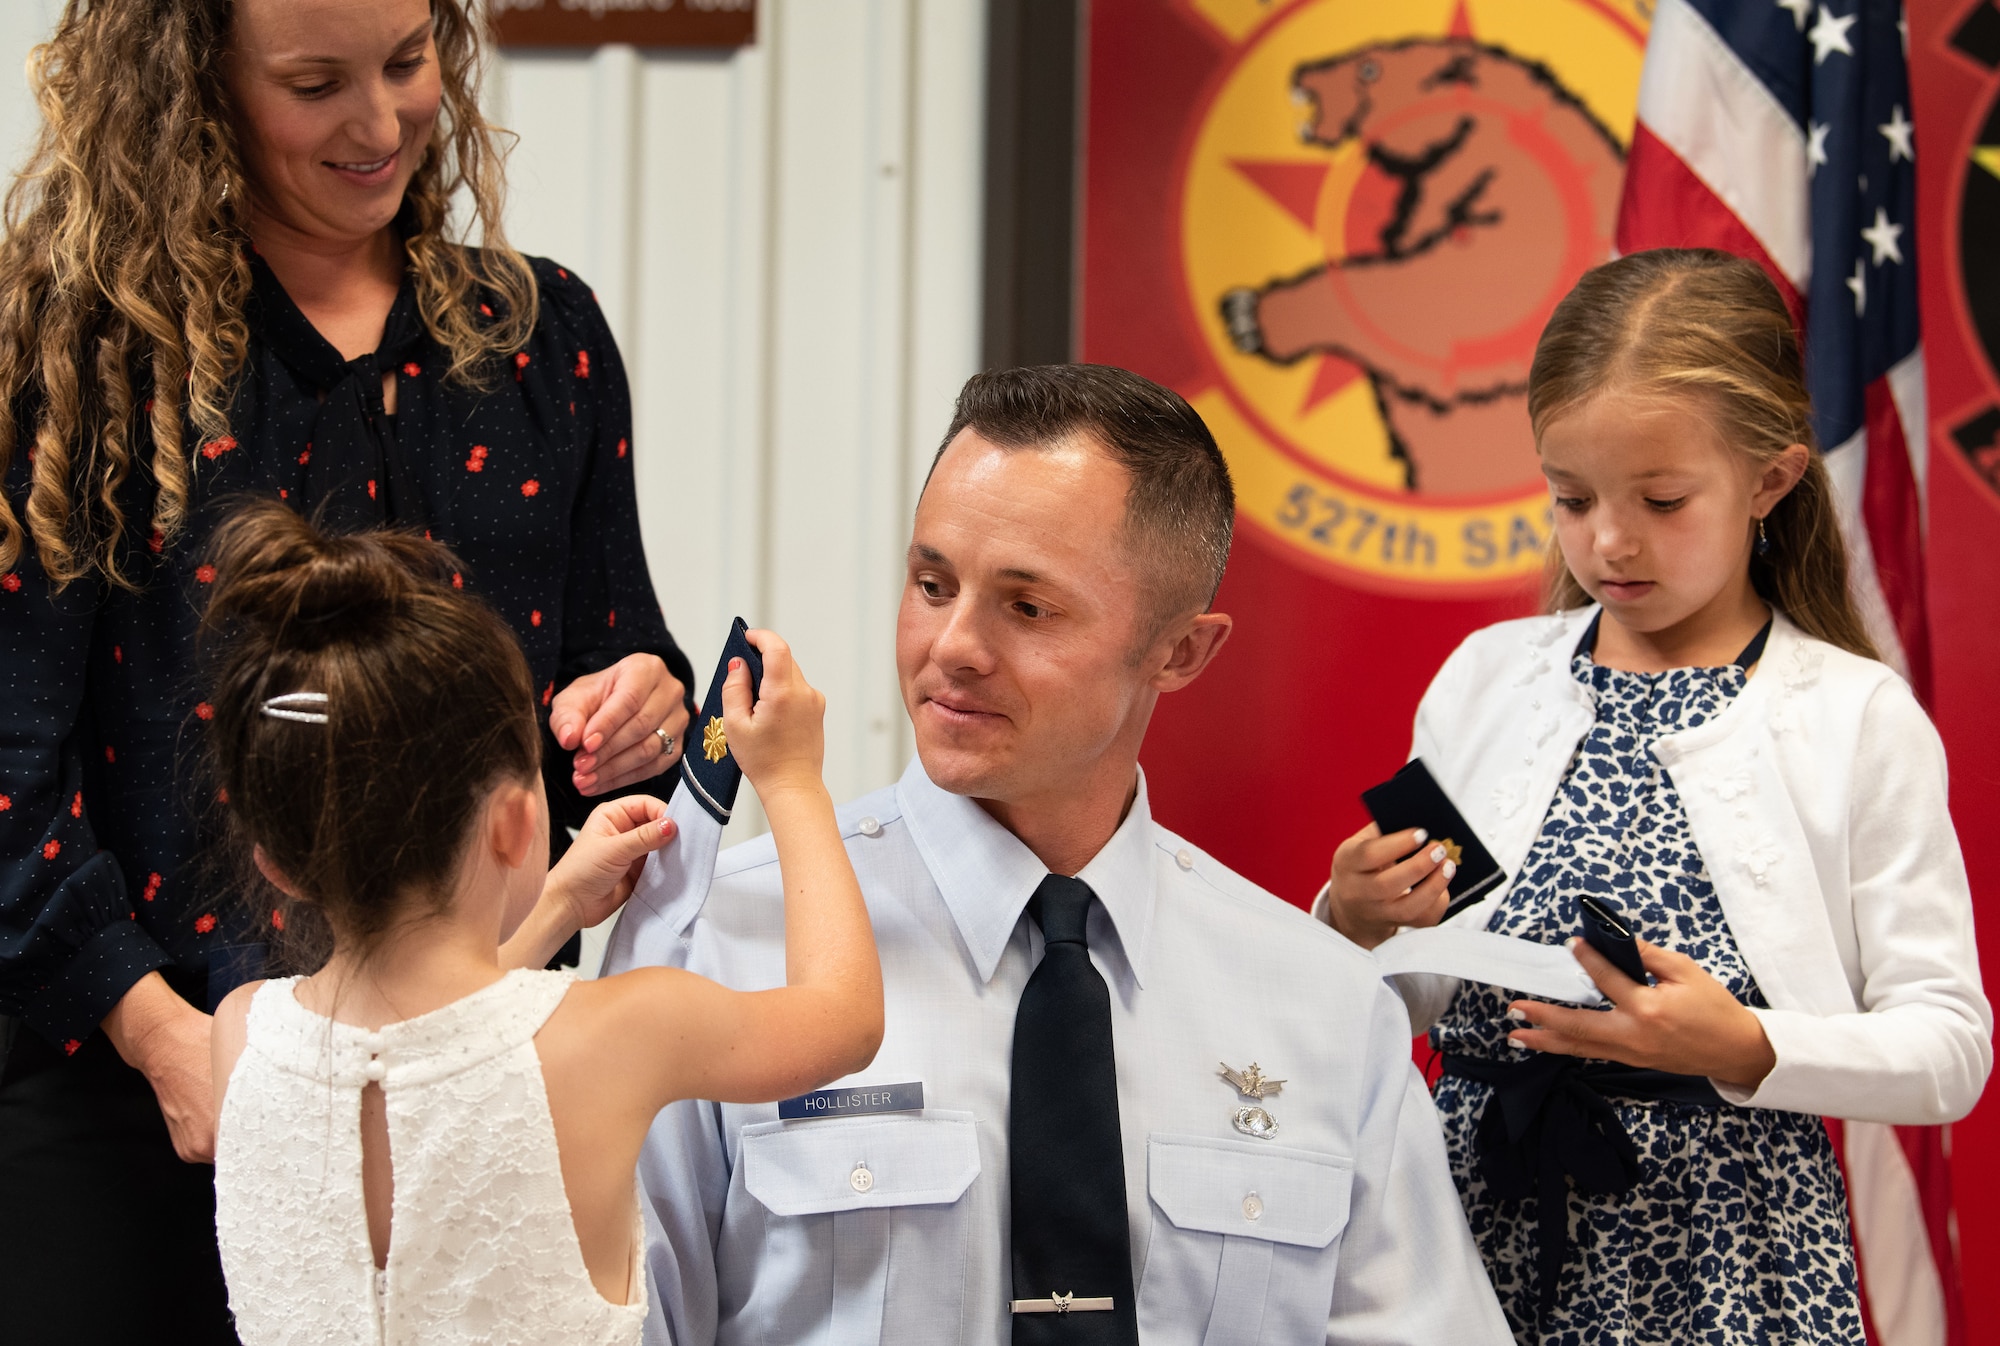 Maj. Scott Hollister’s family members put on his new rank during a promotion ceremony Sept. 8, 2019.